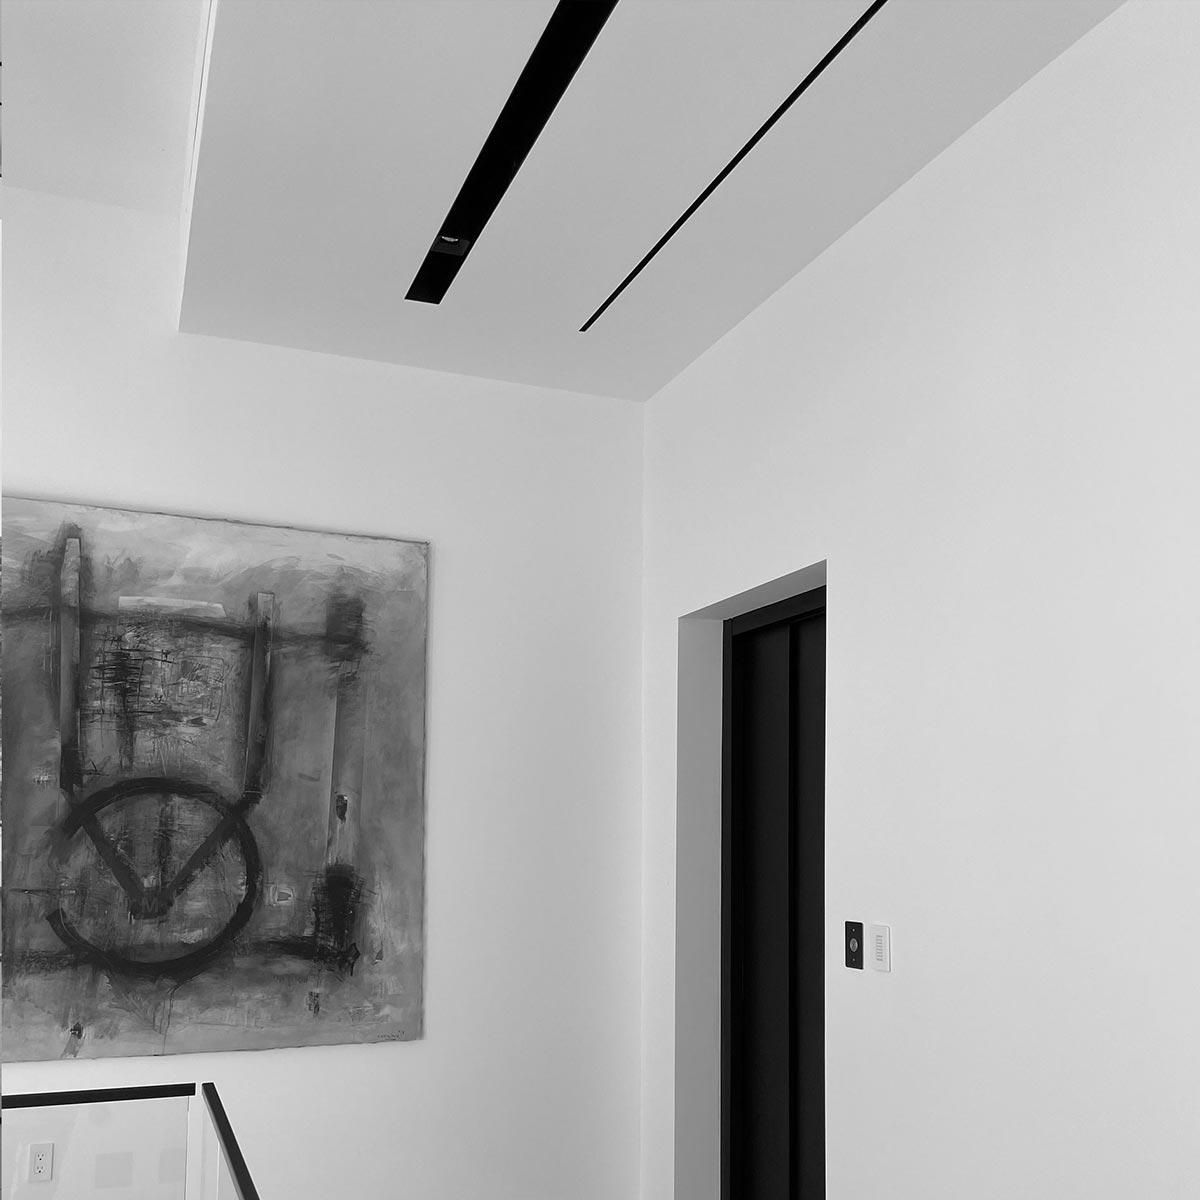 Apure Minus 3 Trimless Plaster In Semi Recessed Wall Wash Downlight| Image:32